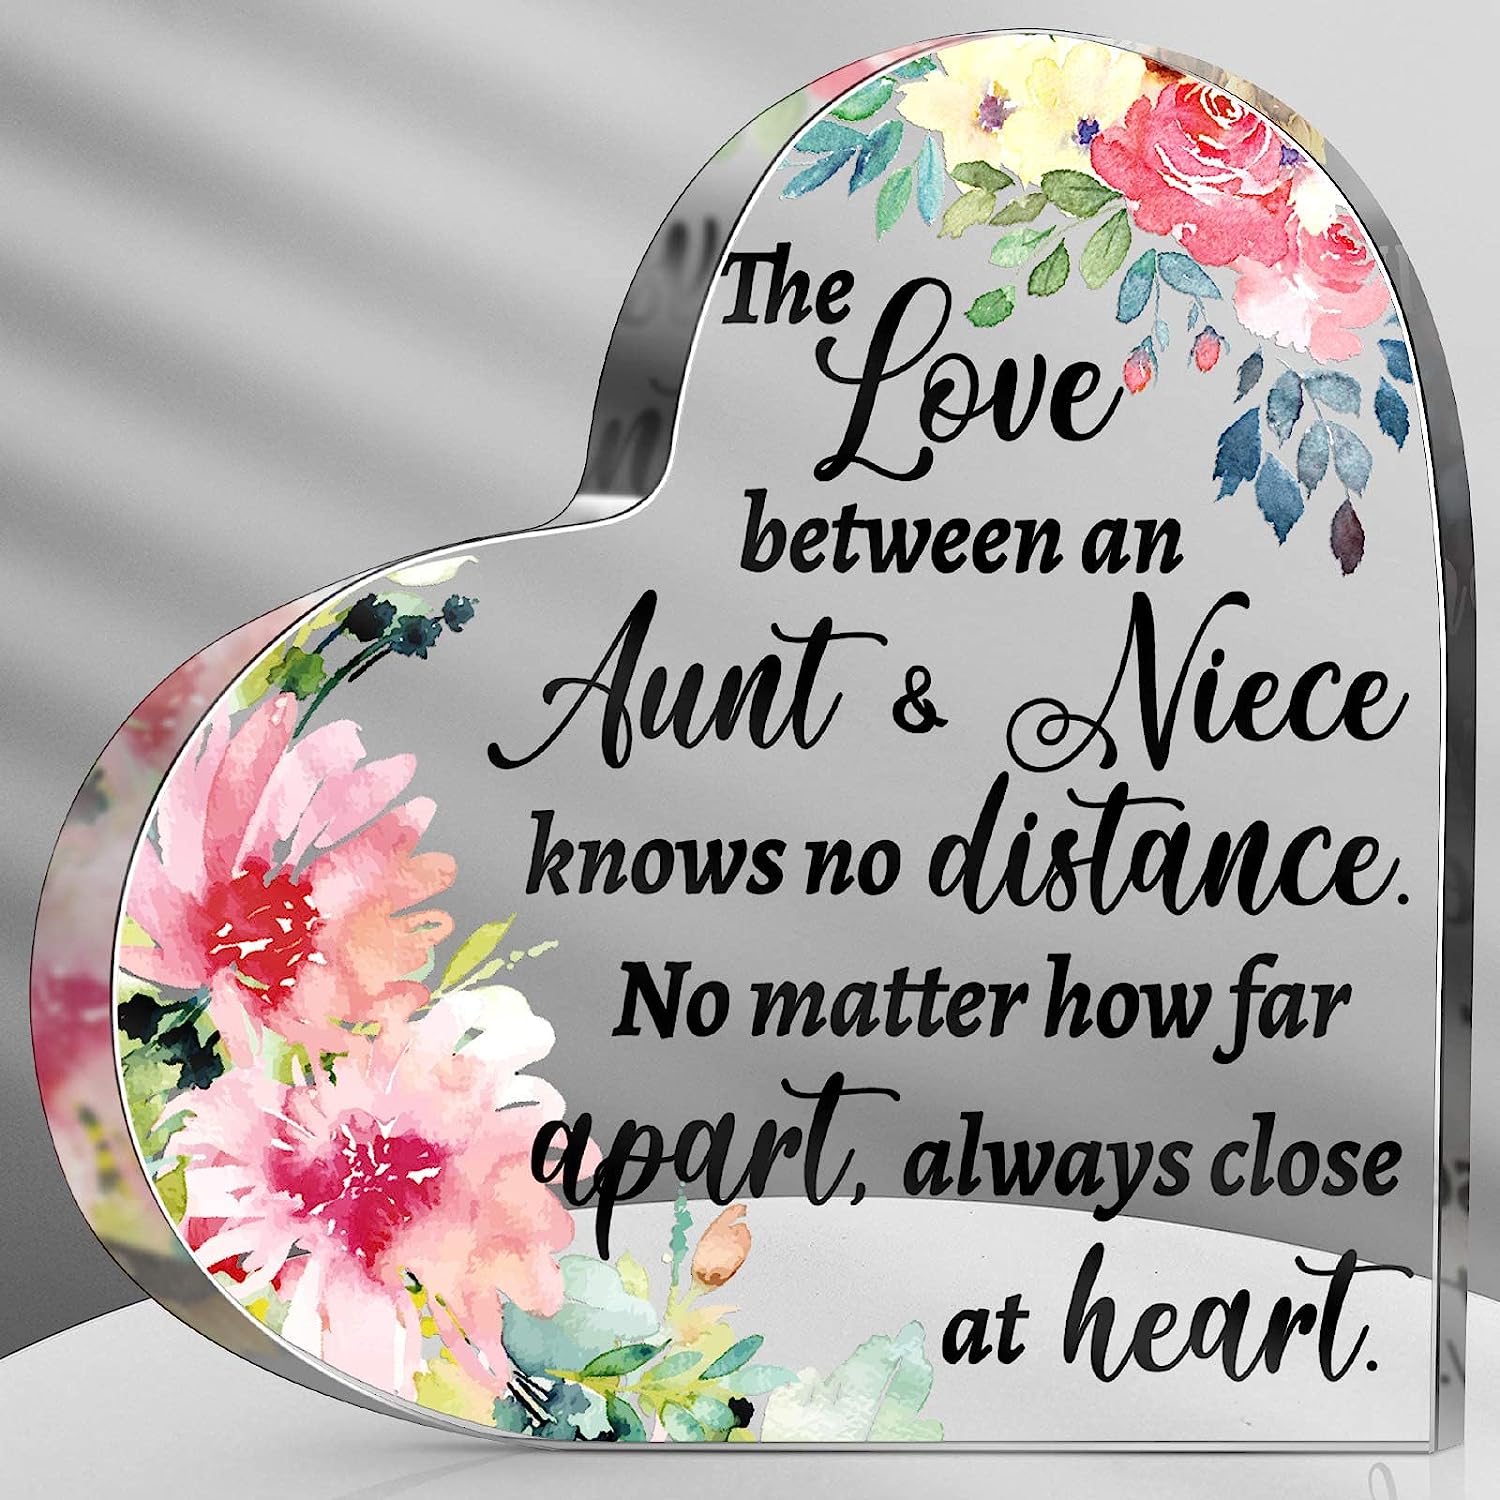 Aunt Gifts - Engraved Acrylic Block Puzzle Aunt Gift 3.35 x 2.76